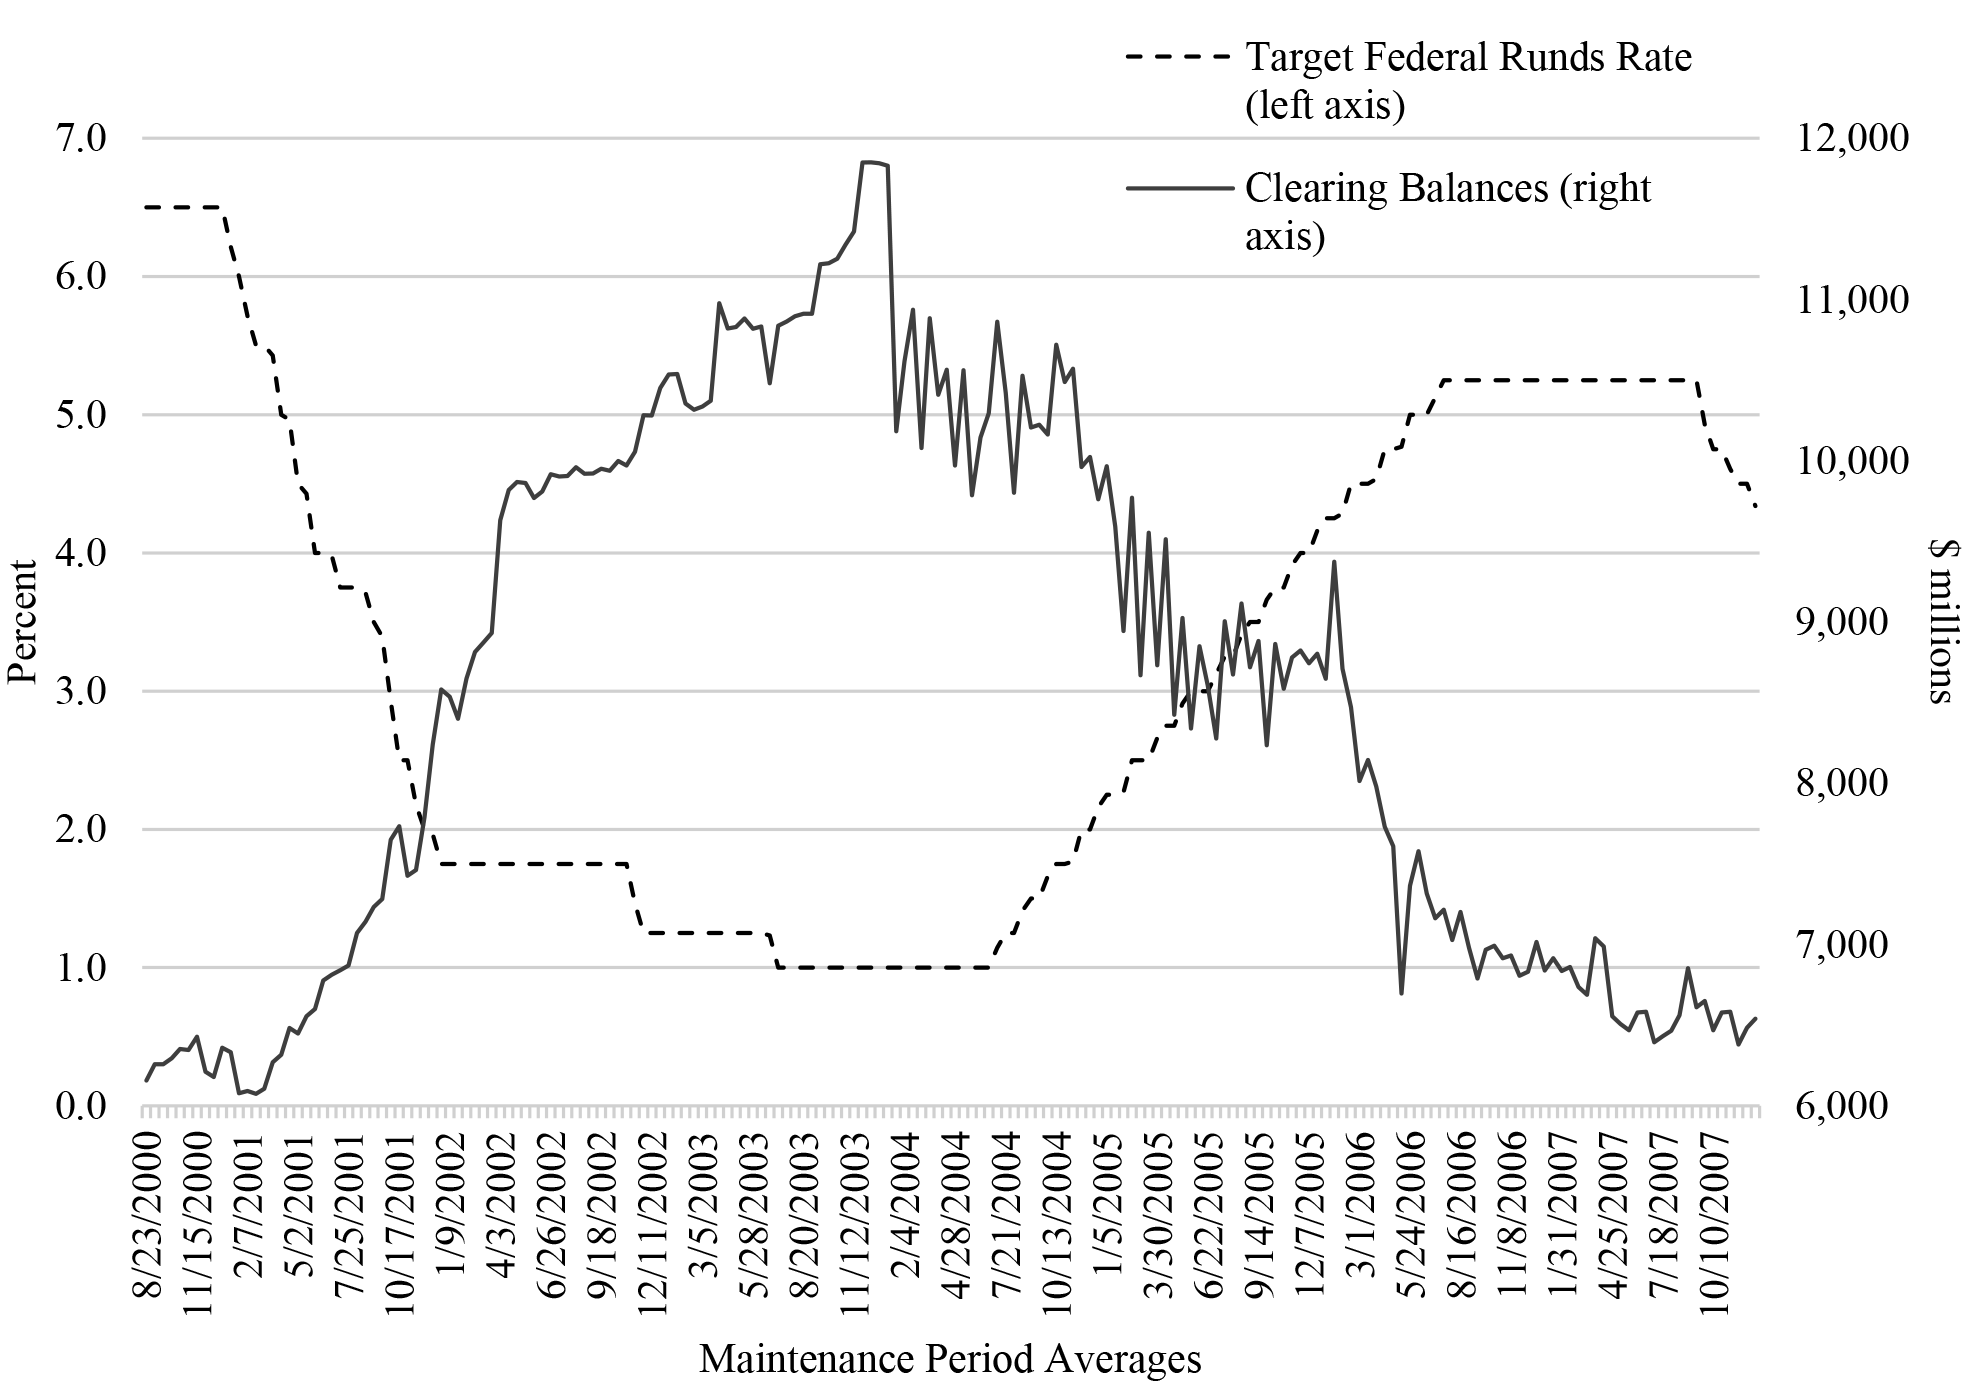 Figure 2: Target Federal Funds Rate and Aggregate Clearing Balances Maintenance Period Averages from August 23, 2000, to December 19, 2007. See accessible link for data description.